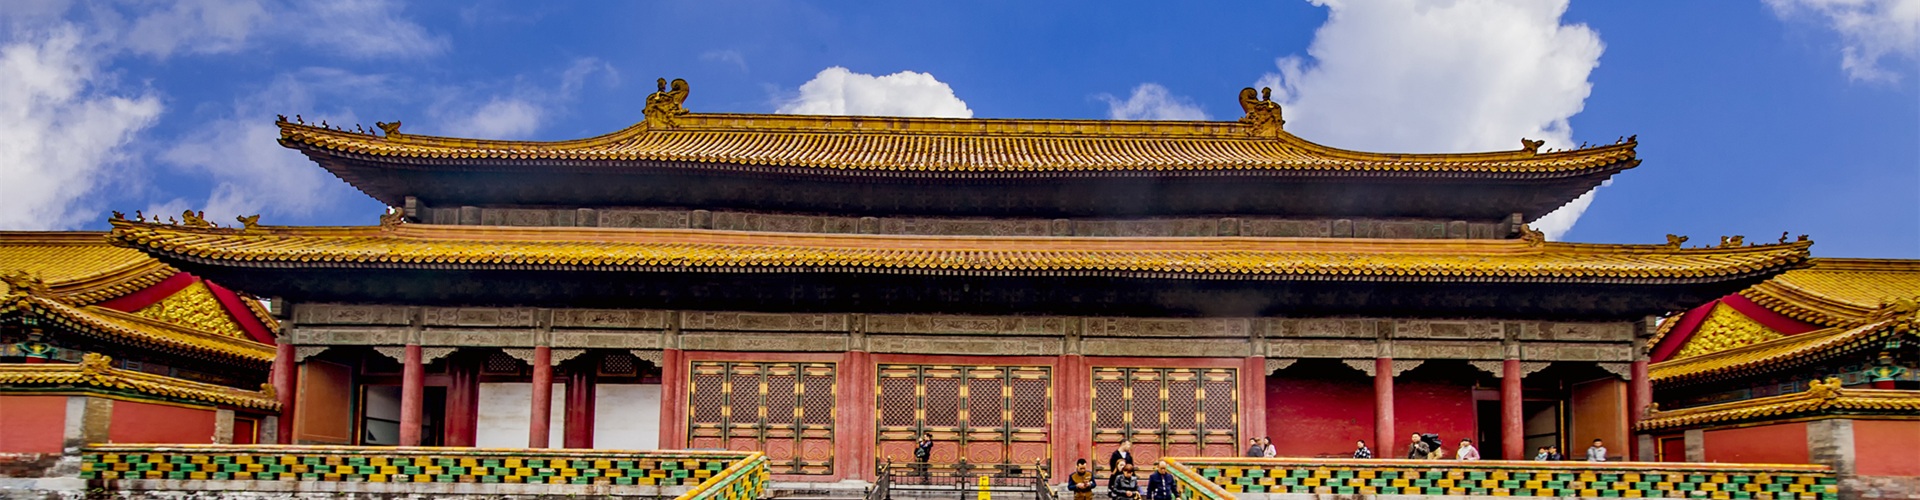 The Forbidden City - an Incomparable Chinese Imperial Palace